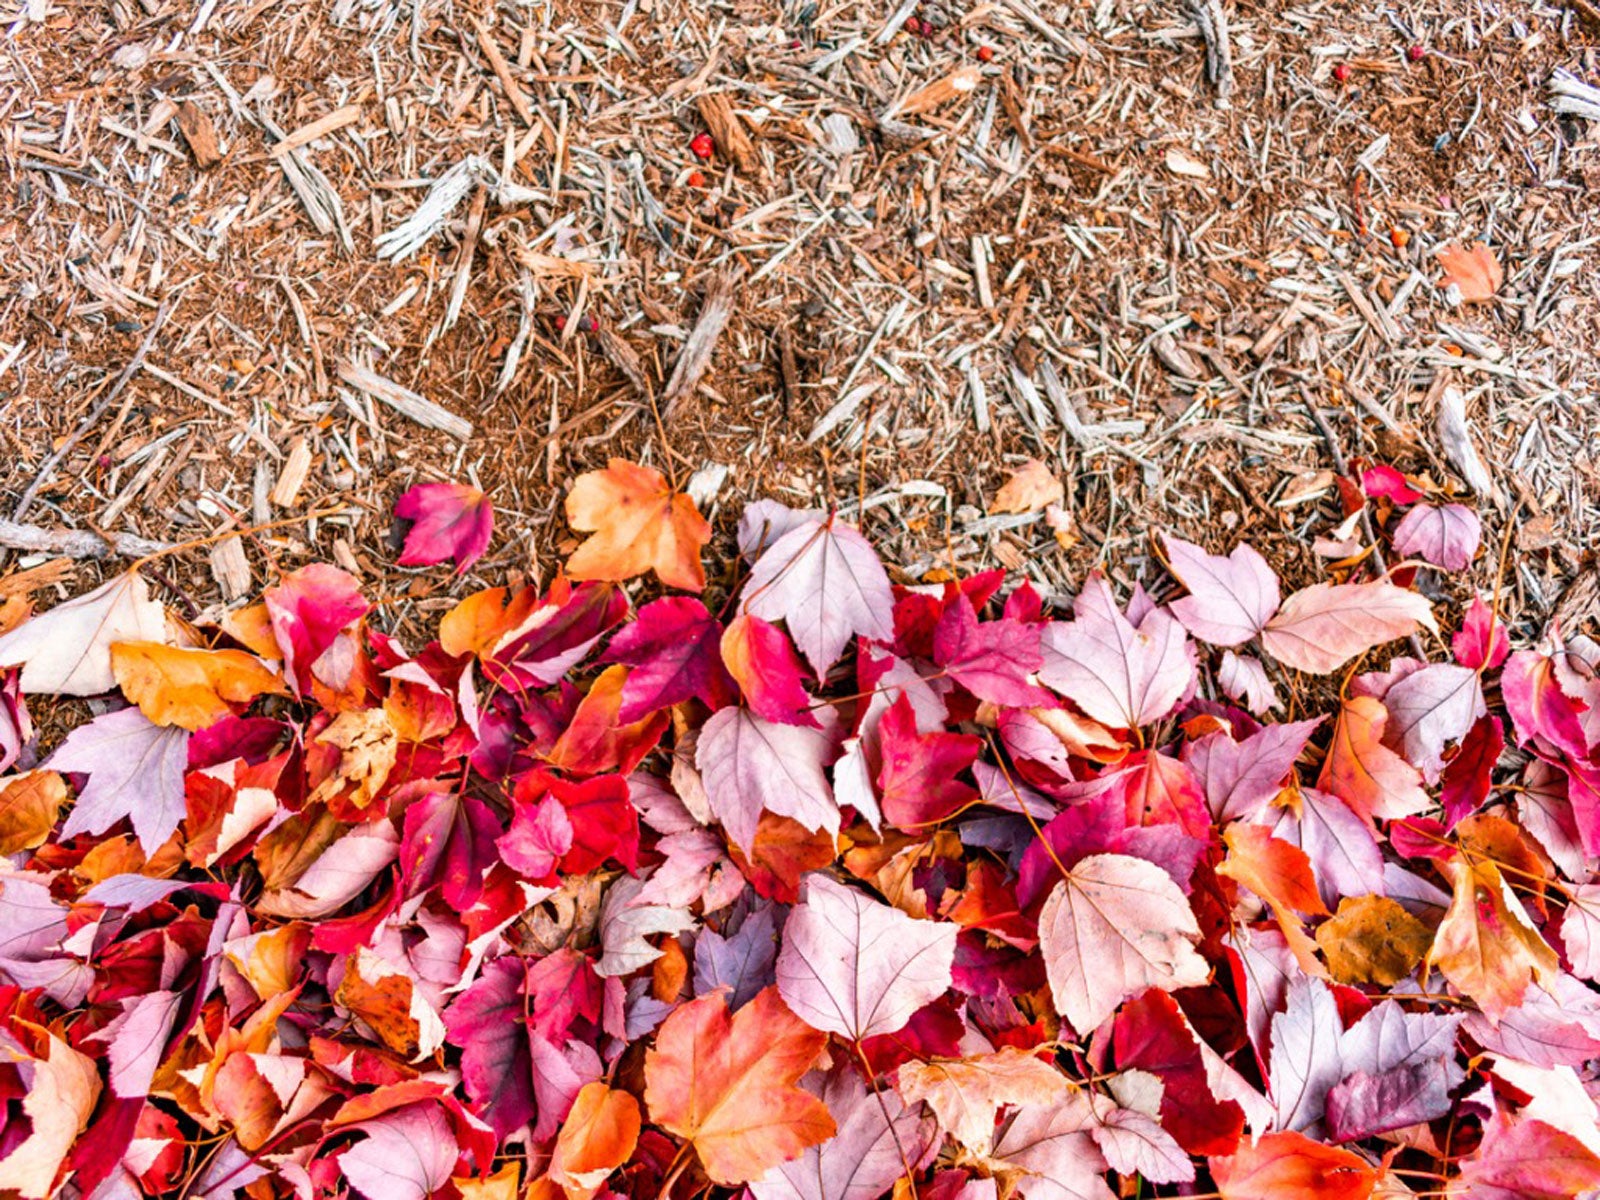 Shredded Mulches and Leaves